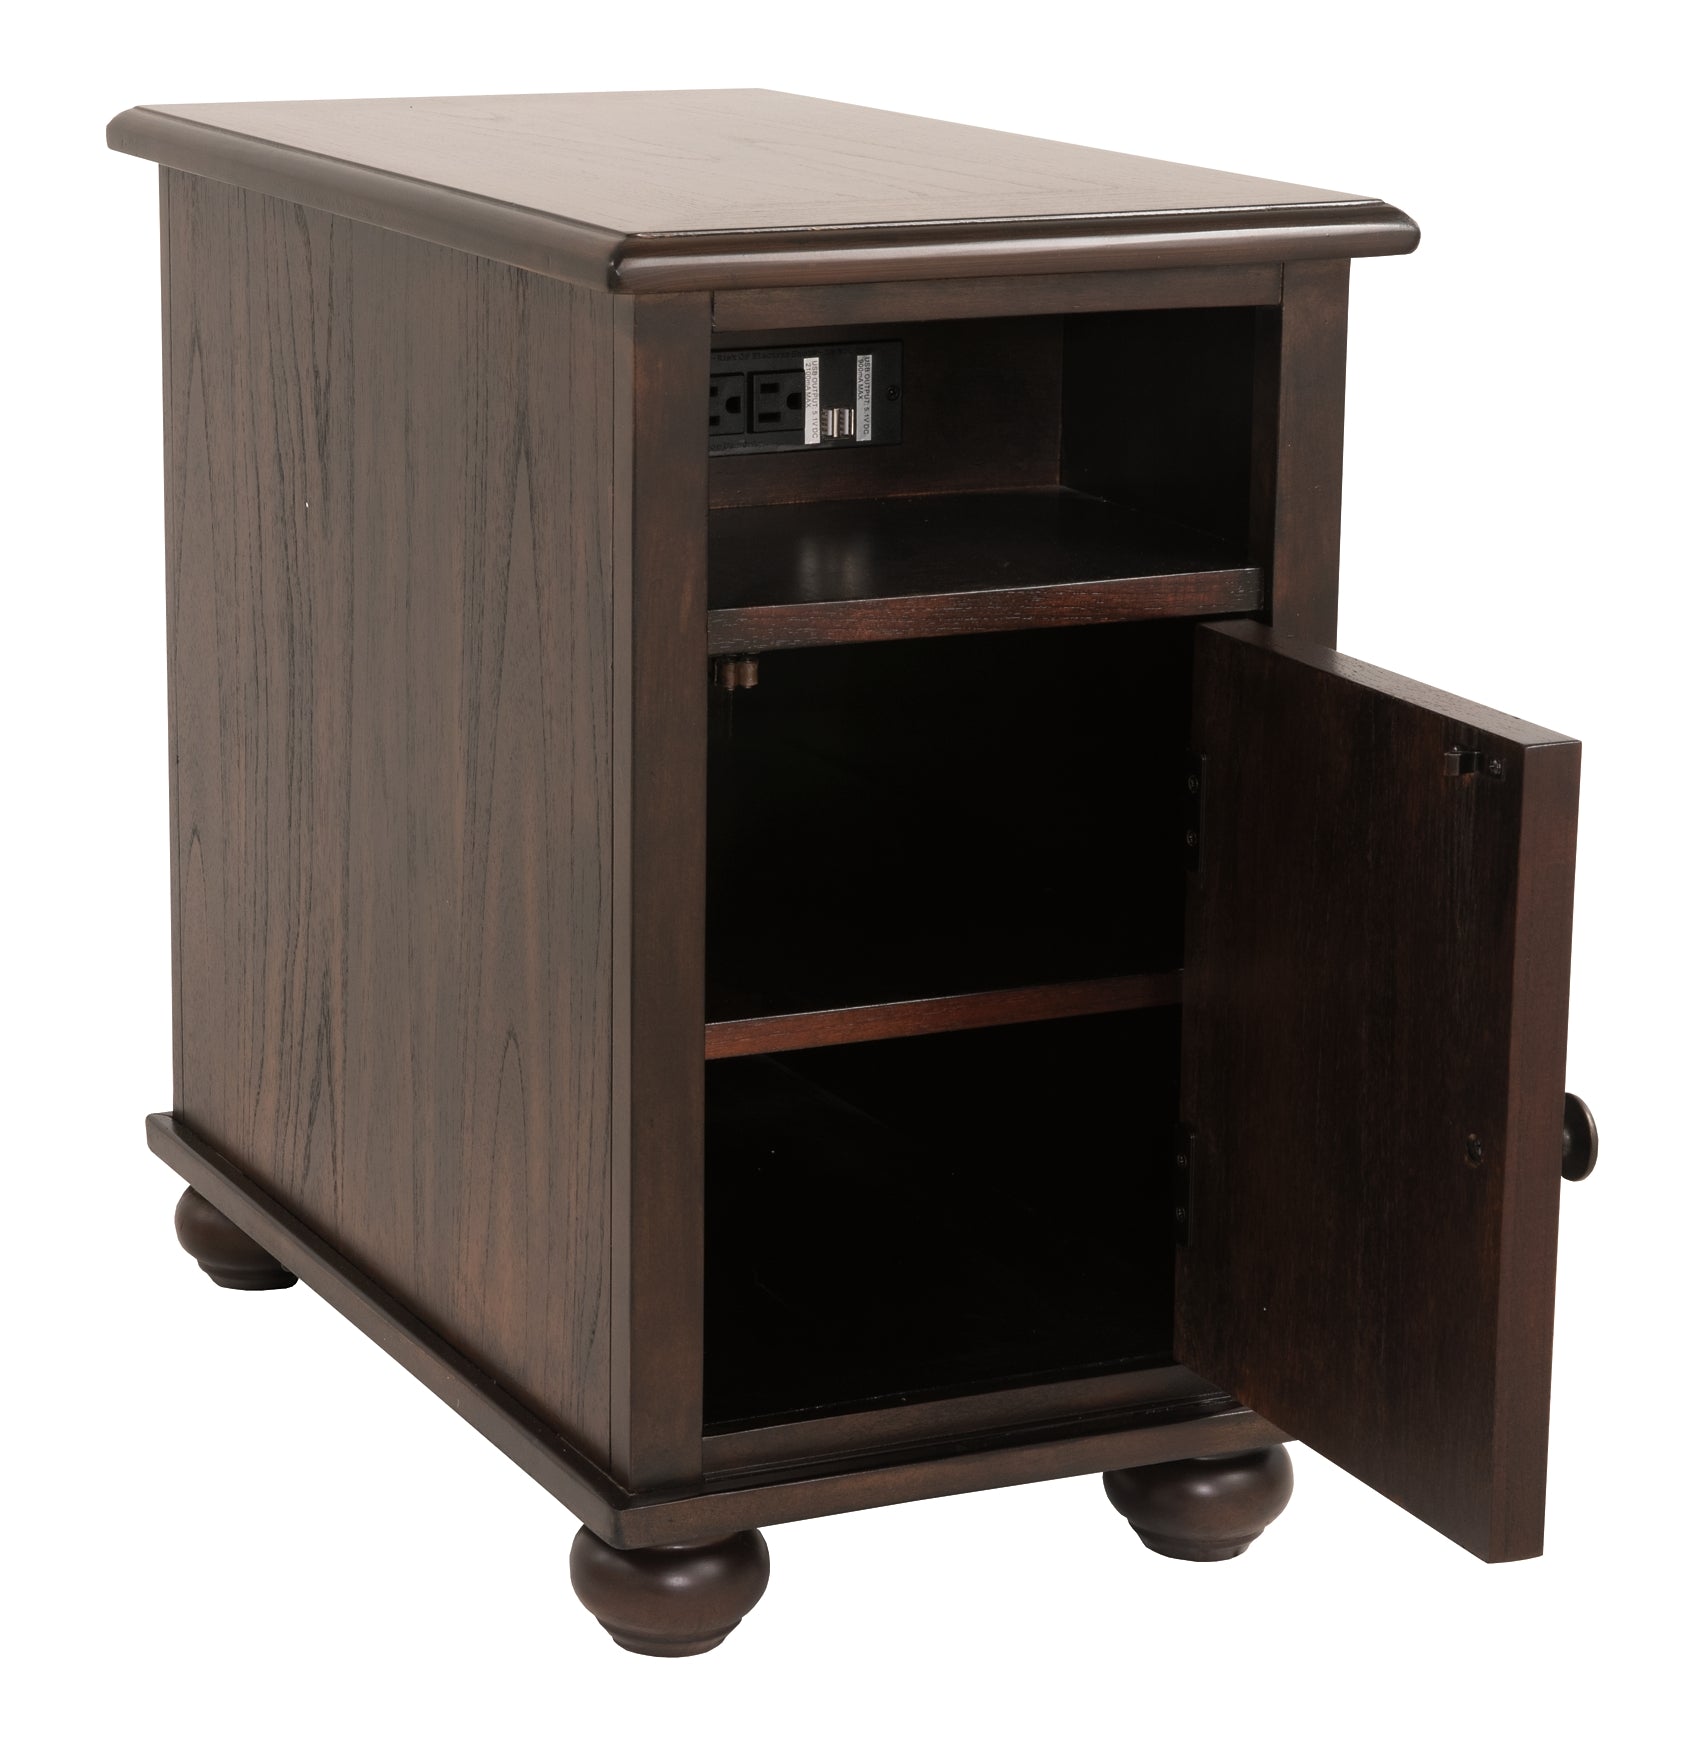 Ashley Express - Barilanni Chair Side End Table Wilson Furniture (OH)  in Bridgeport, Ohio. Serving Bridgeport, Yorkville, Bellaire, & Avondale